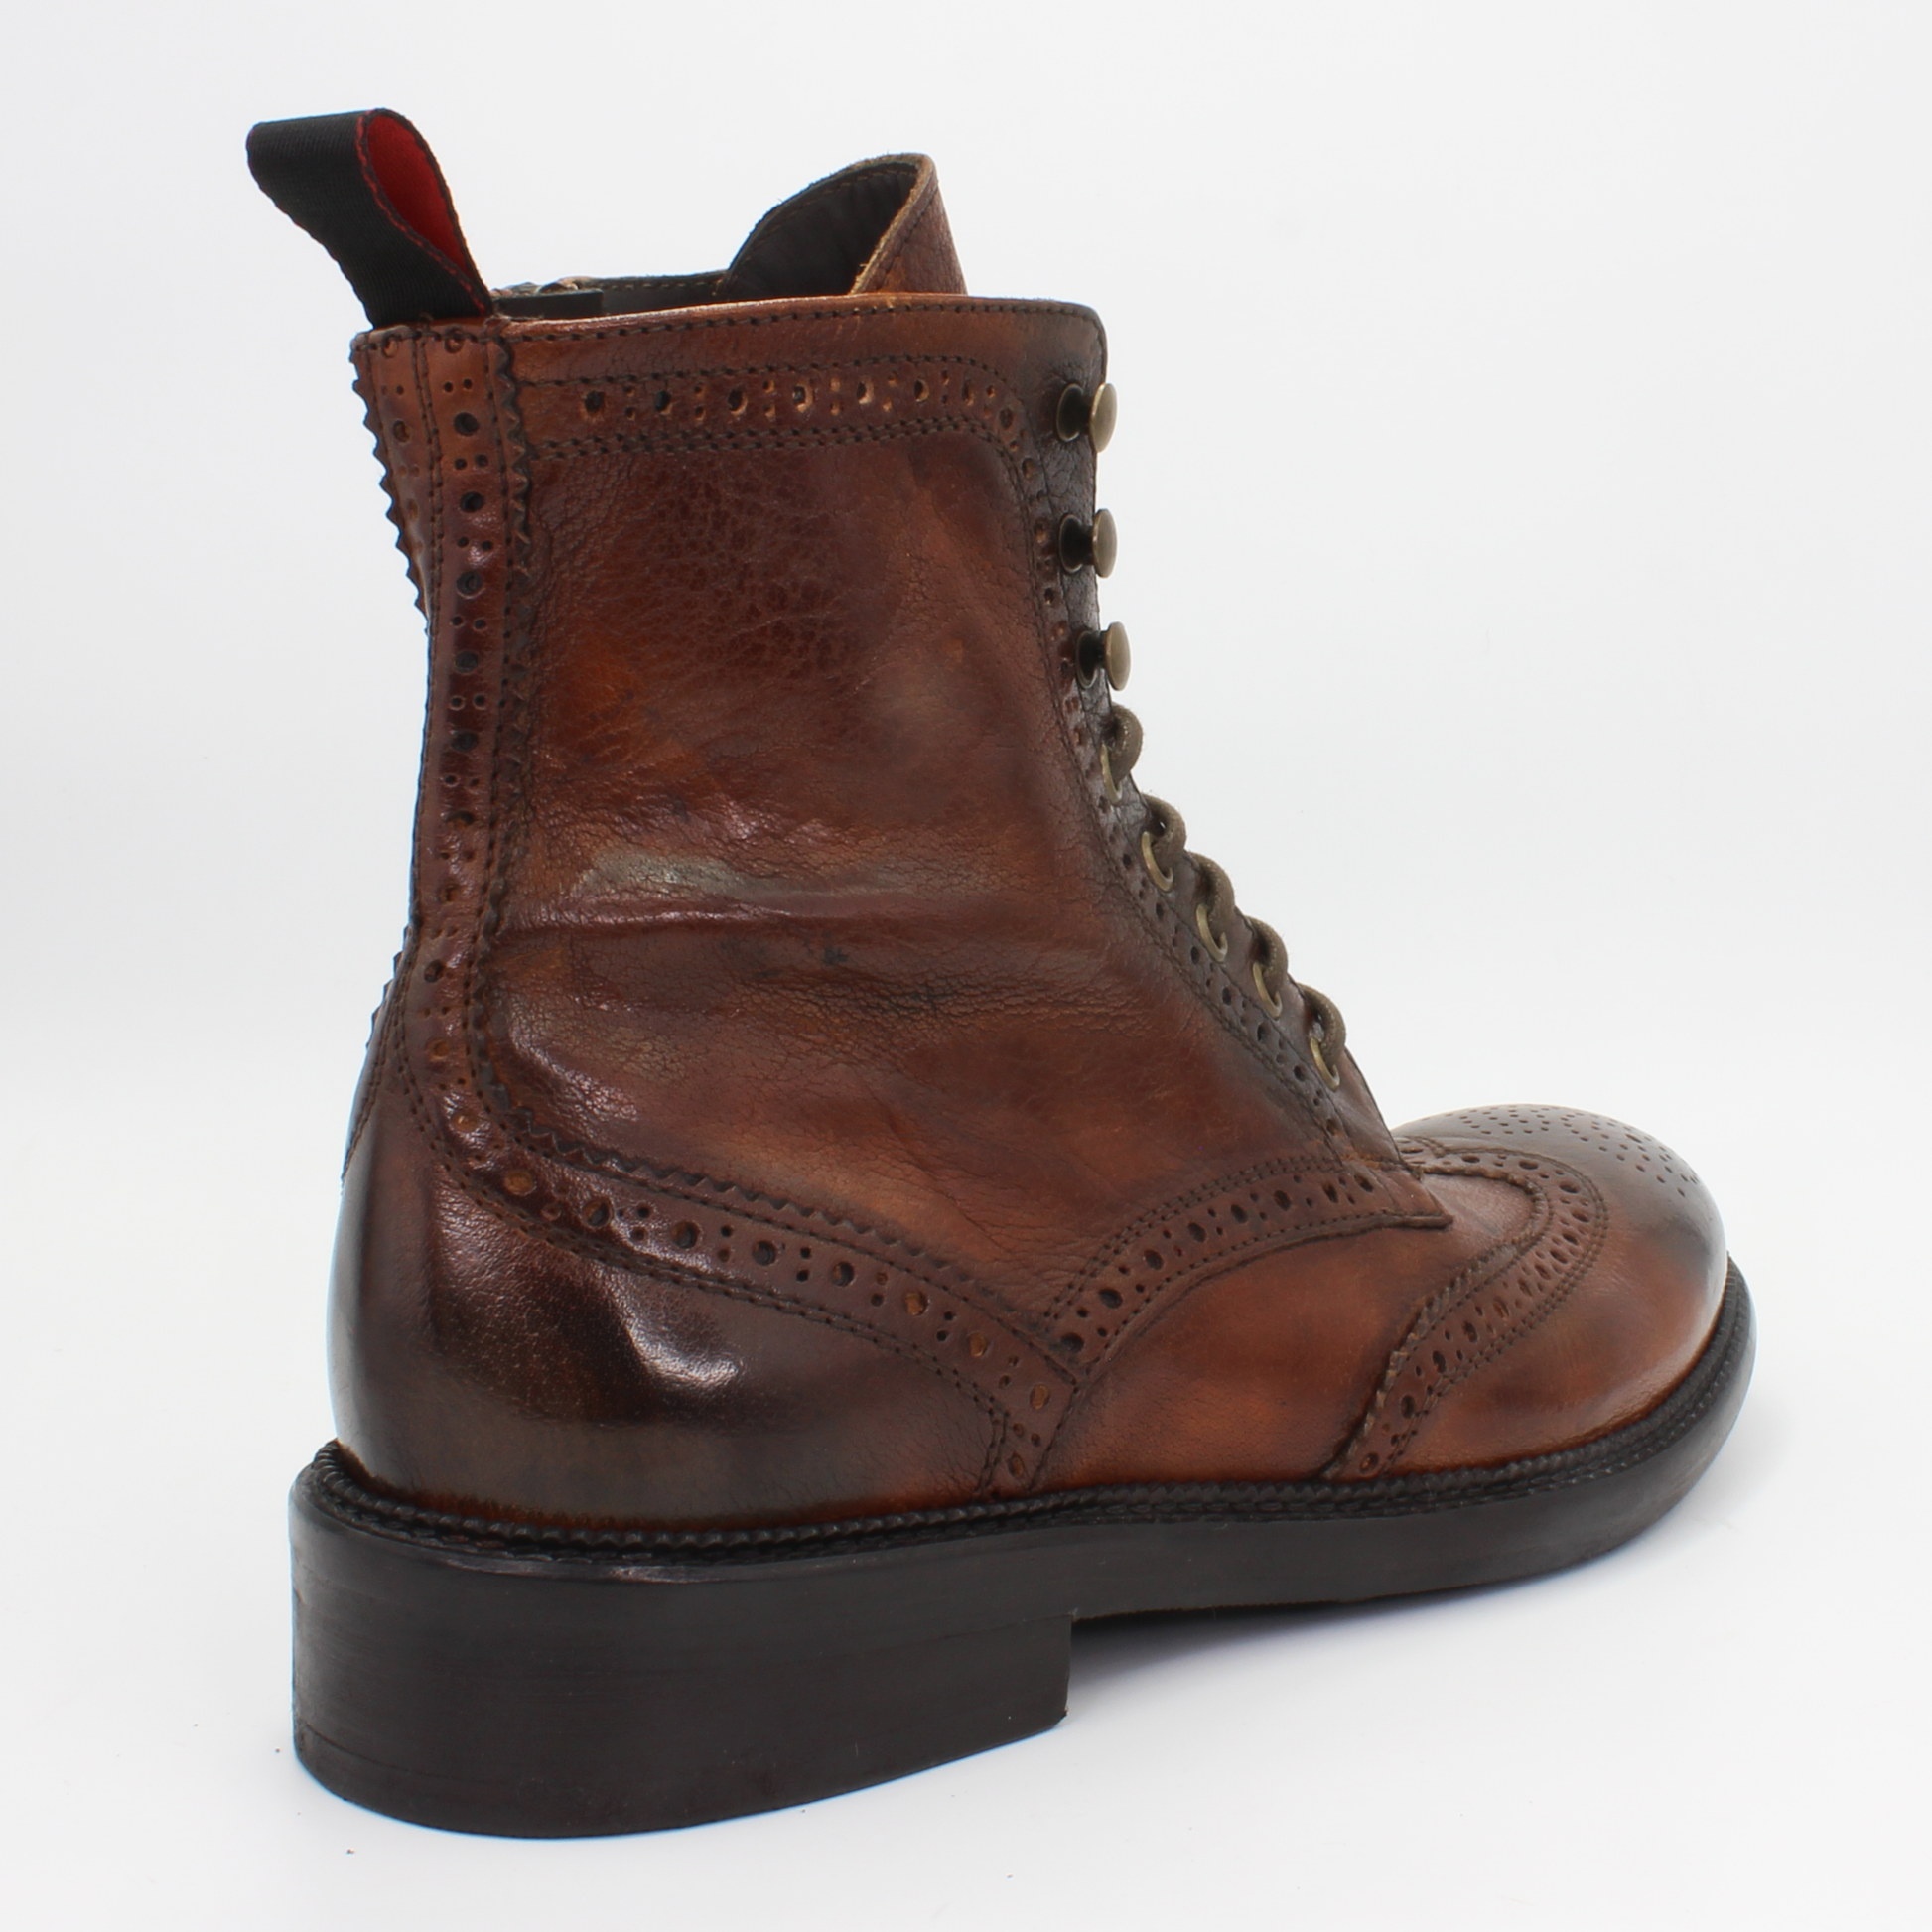 Shop Handmade Italian Leather Boot in Candy Cuoio Tan (JP37340/1) or browse our range of hand-made Italian boots for men in leather or suede in-store at Aliverti Cape Town, or shop online. We deliver in South Africa & offer multiple payment plans as well as accept multiple safe & secure payment methods.